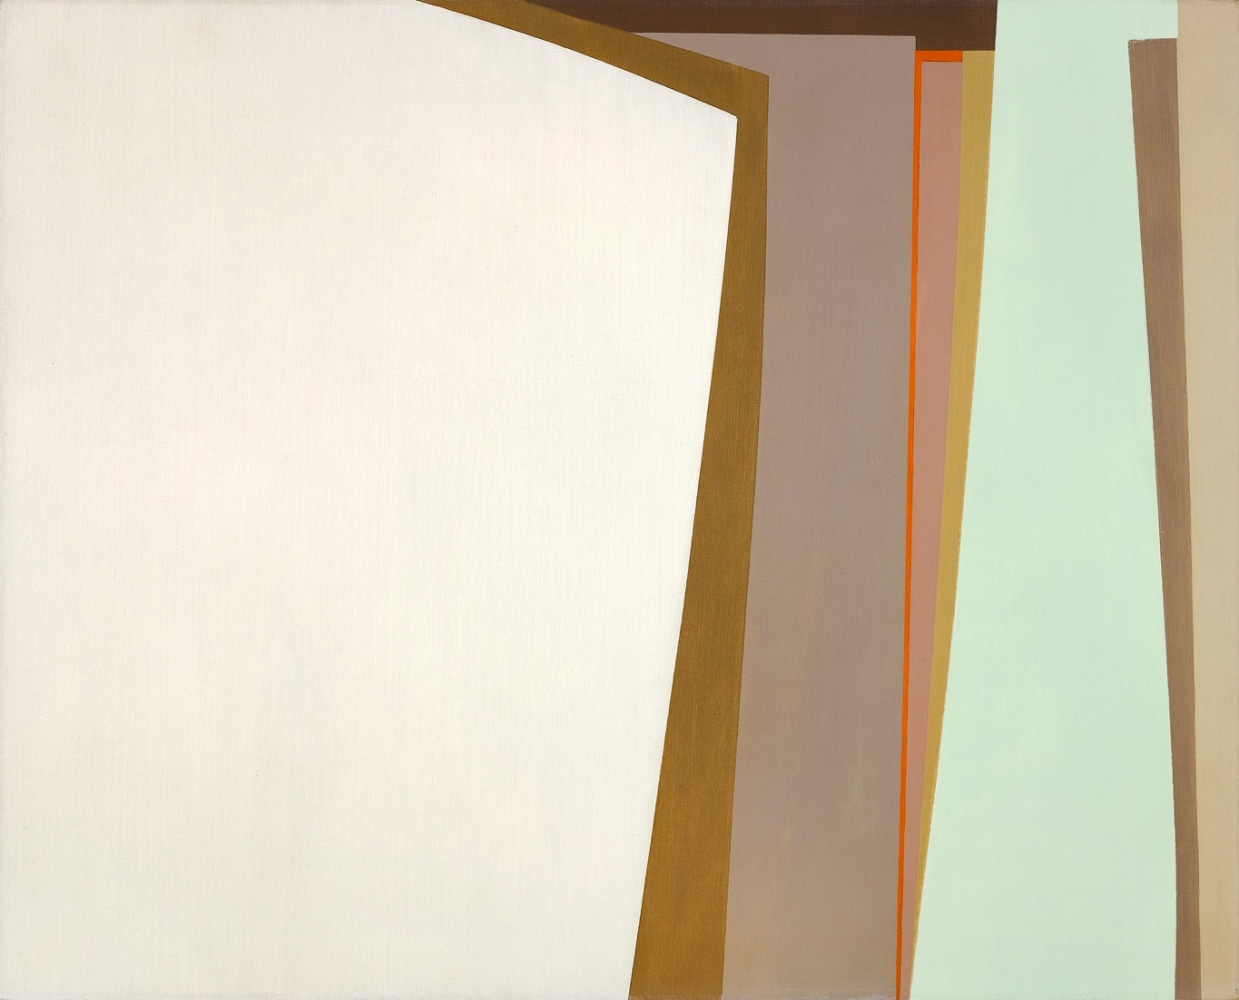 Helen Lundeberg (1908-1999)

Landscape: White and Orange, 1962

oil on canvas

24 x 30 inches; 61 x 76.2 cm